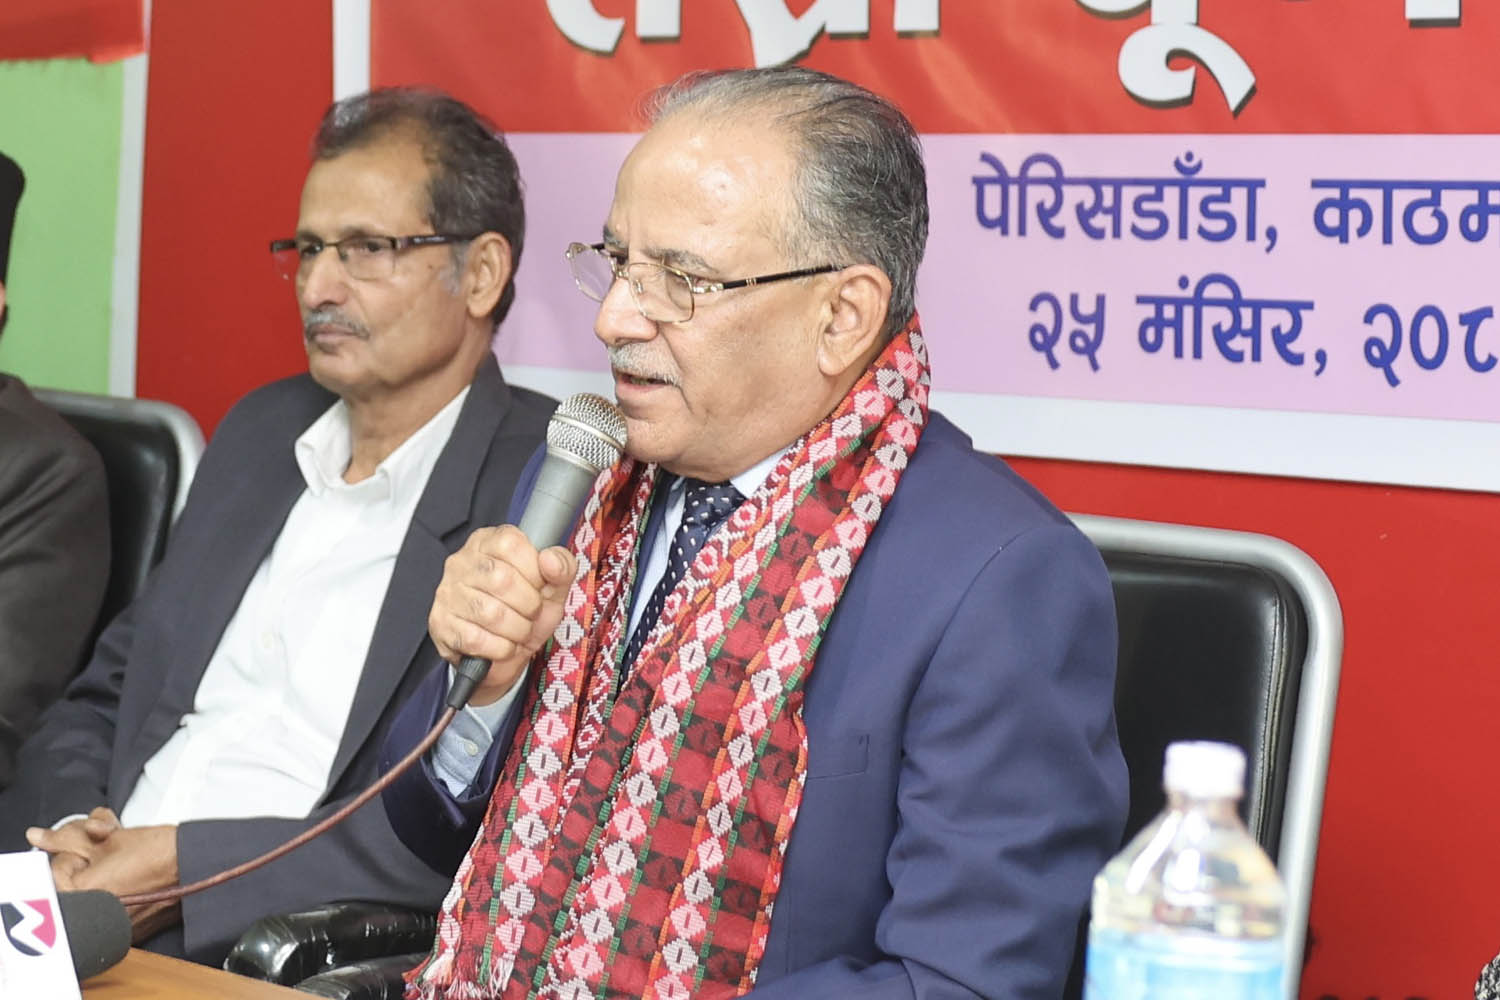 Over 200 Nepalis may be serving in Russian army, says PM Dahal